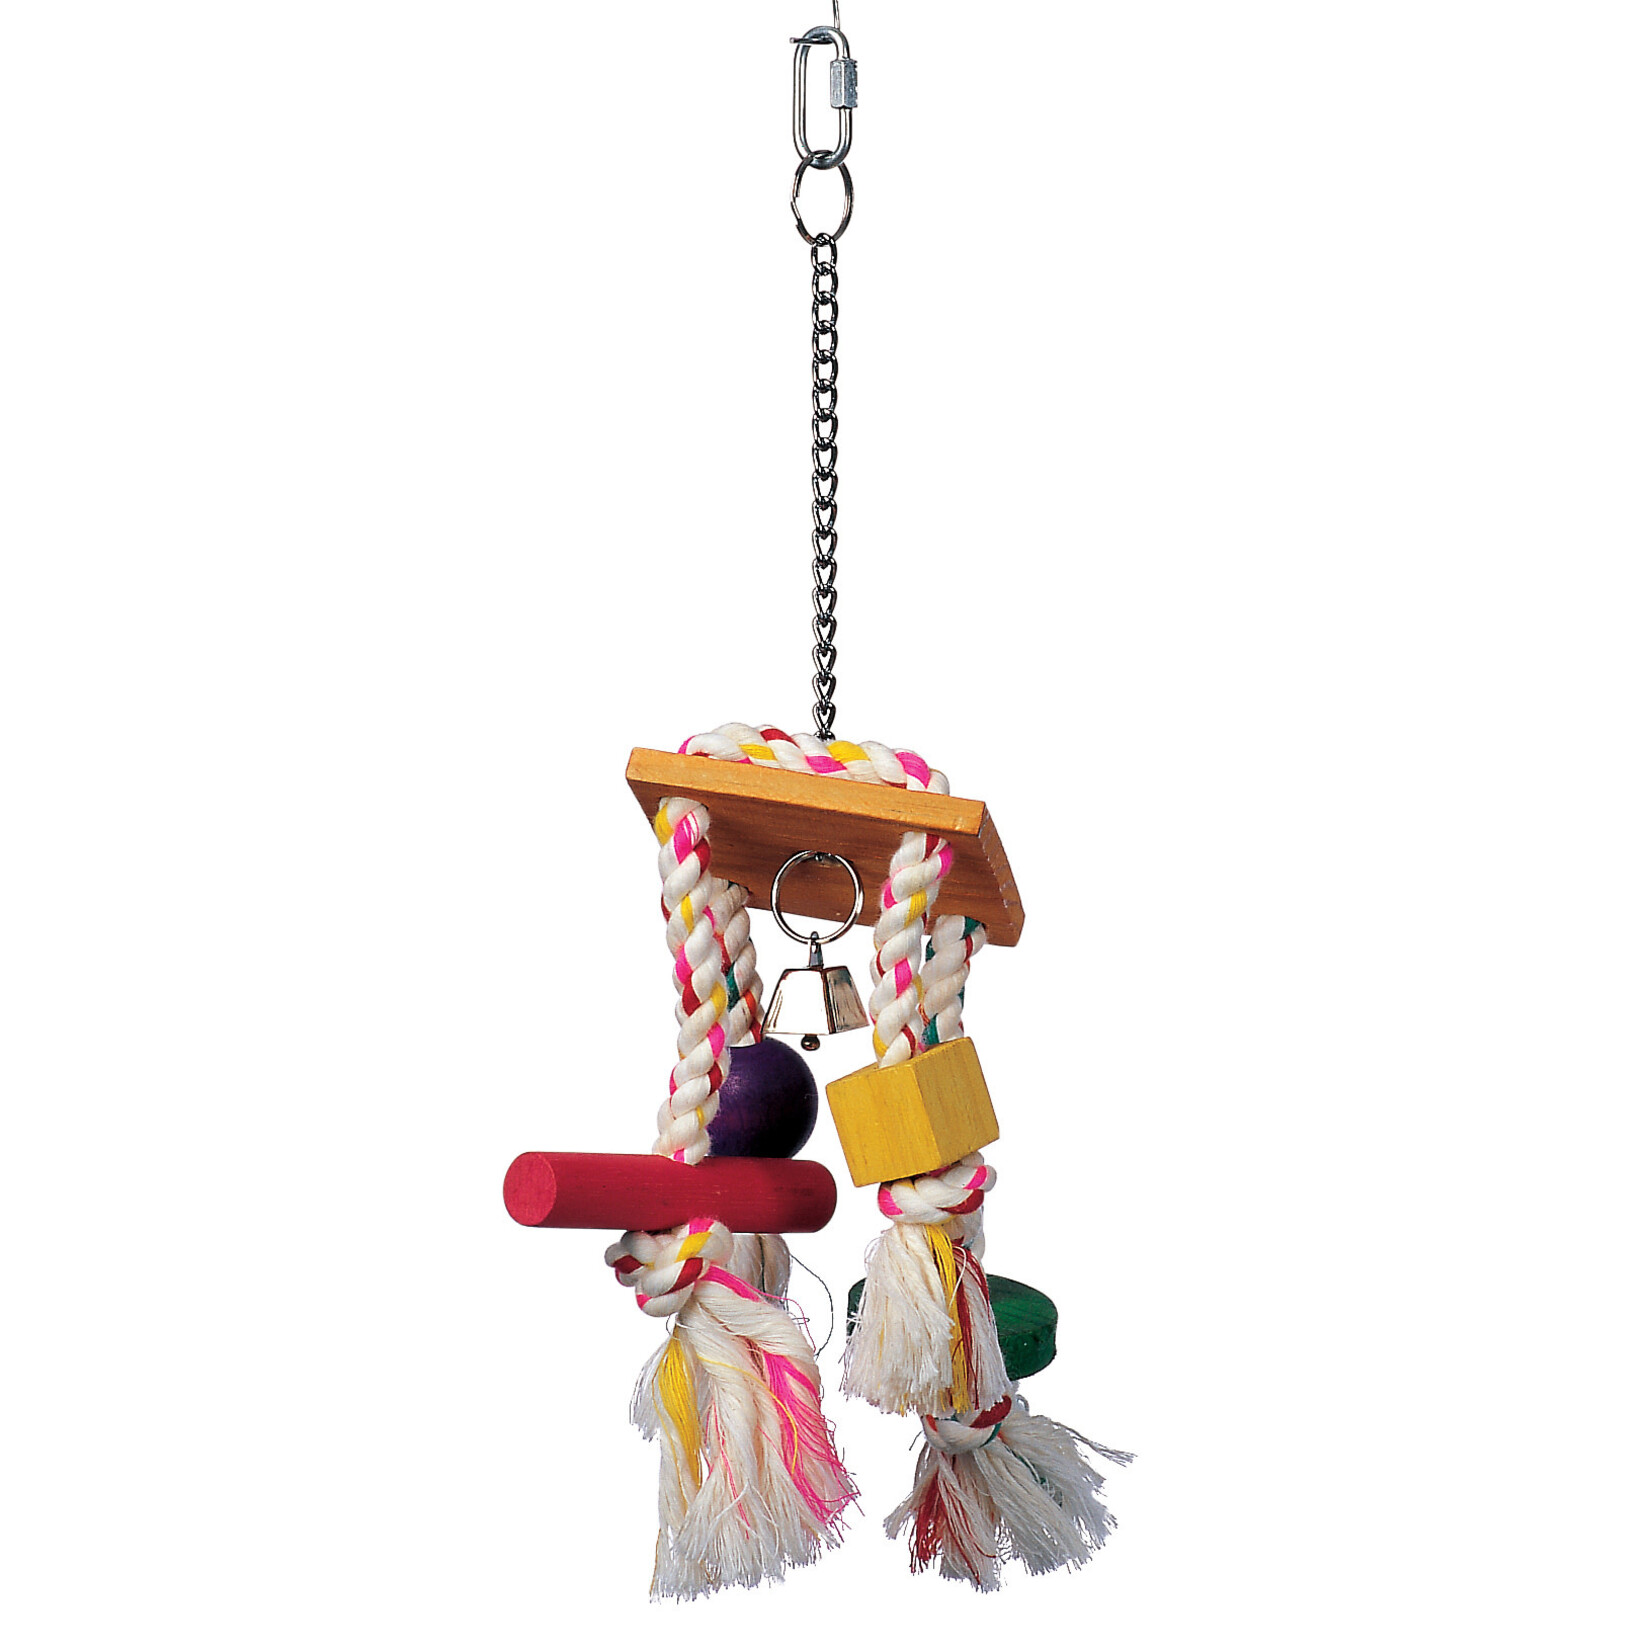 LIVING WORLD Living World Junglewood Bird Toy - Rope Chime with Bell - Cylinder - Block and Bead